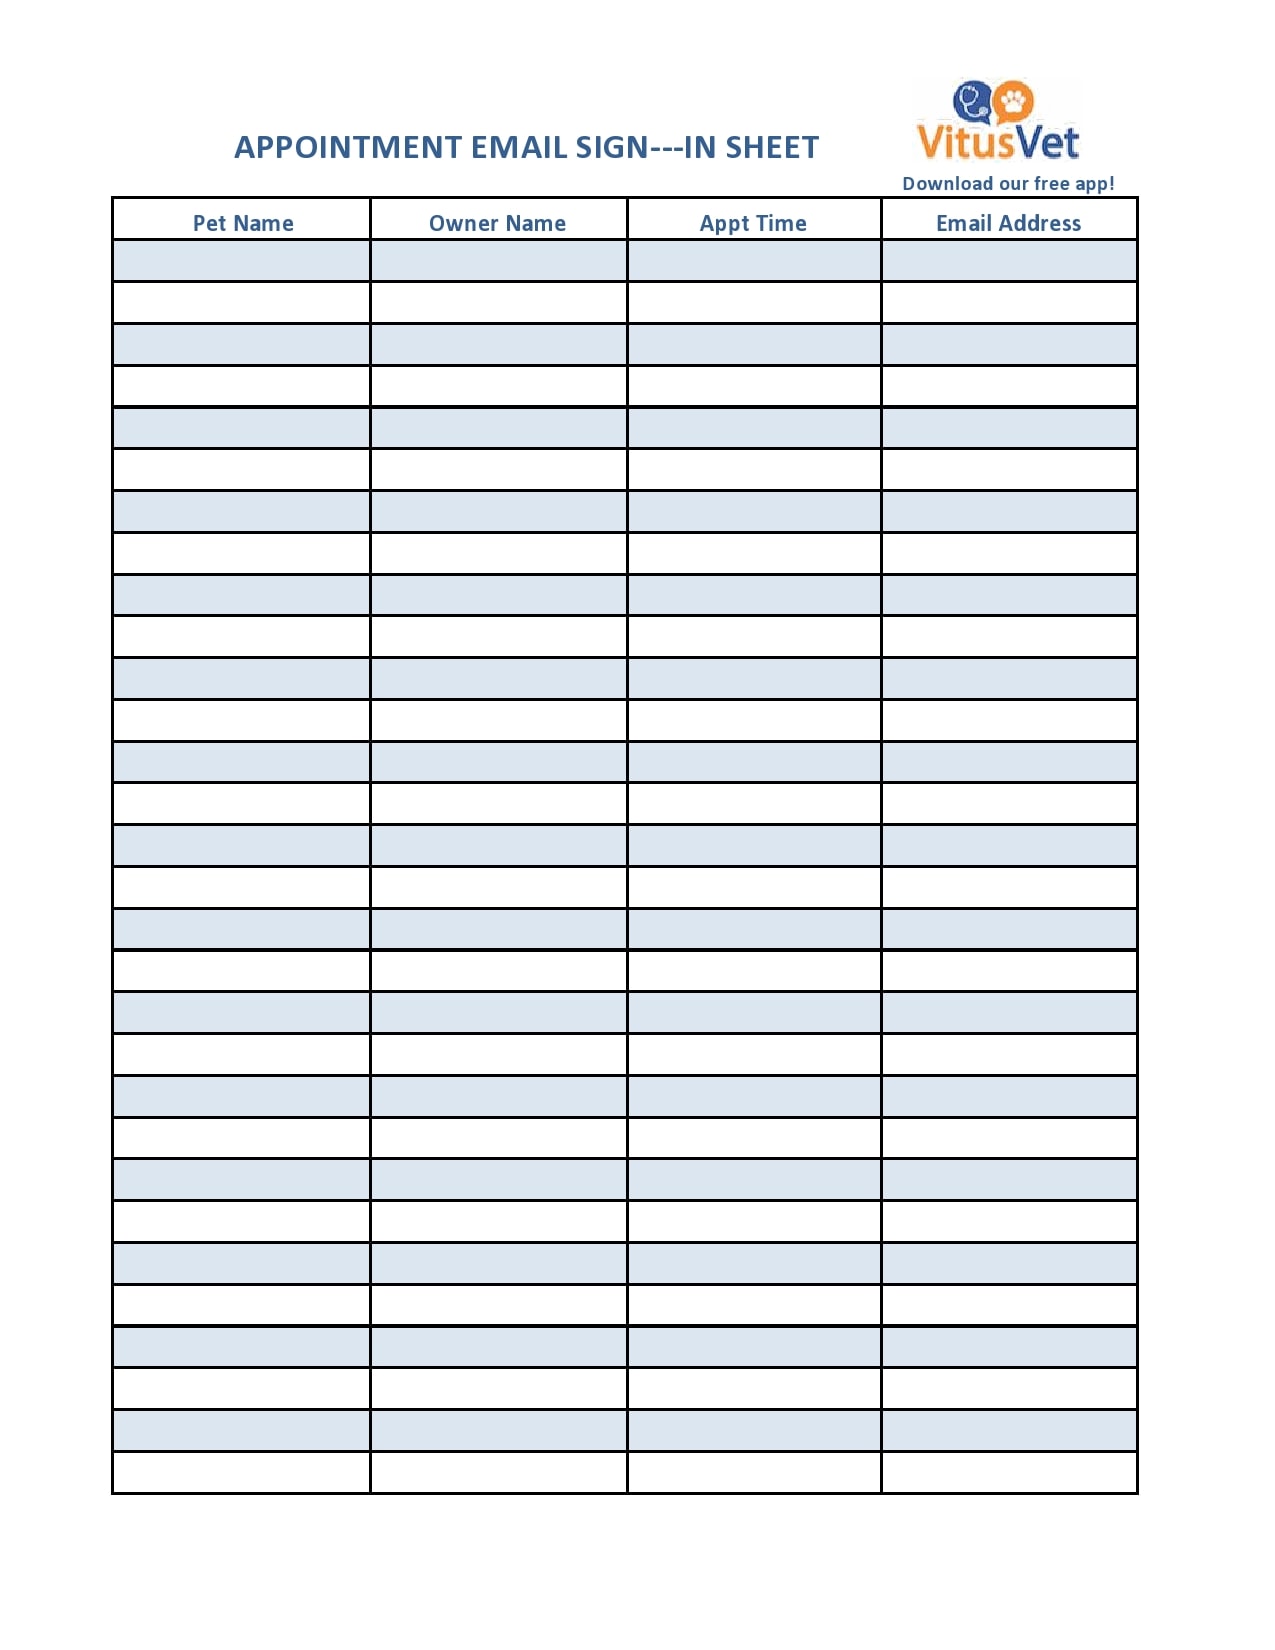 printable-email-sign-up-sheet-email-marketing-template-etsy-israel